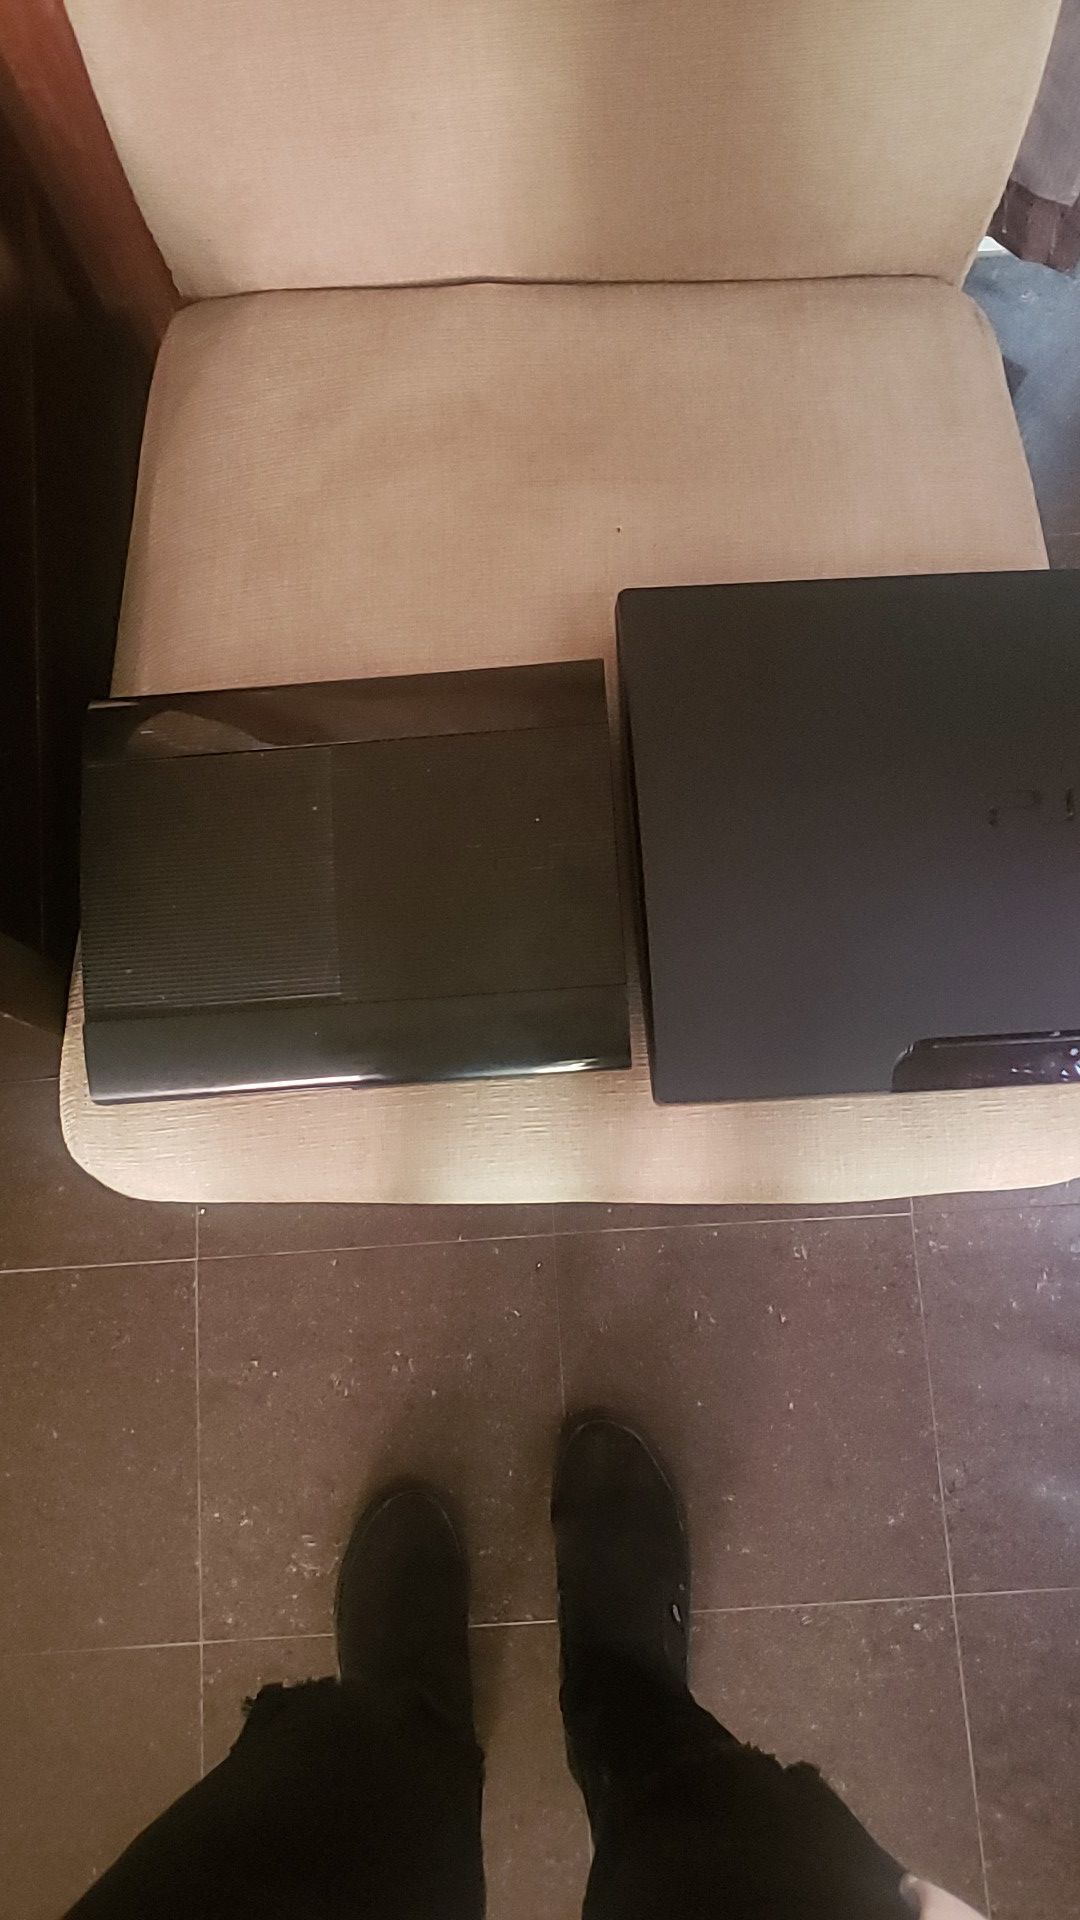 Ps3 slim, and ps3 superslim